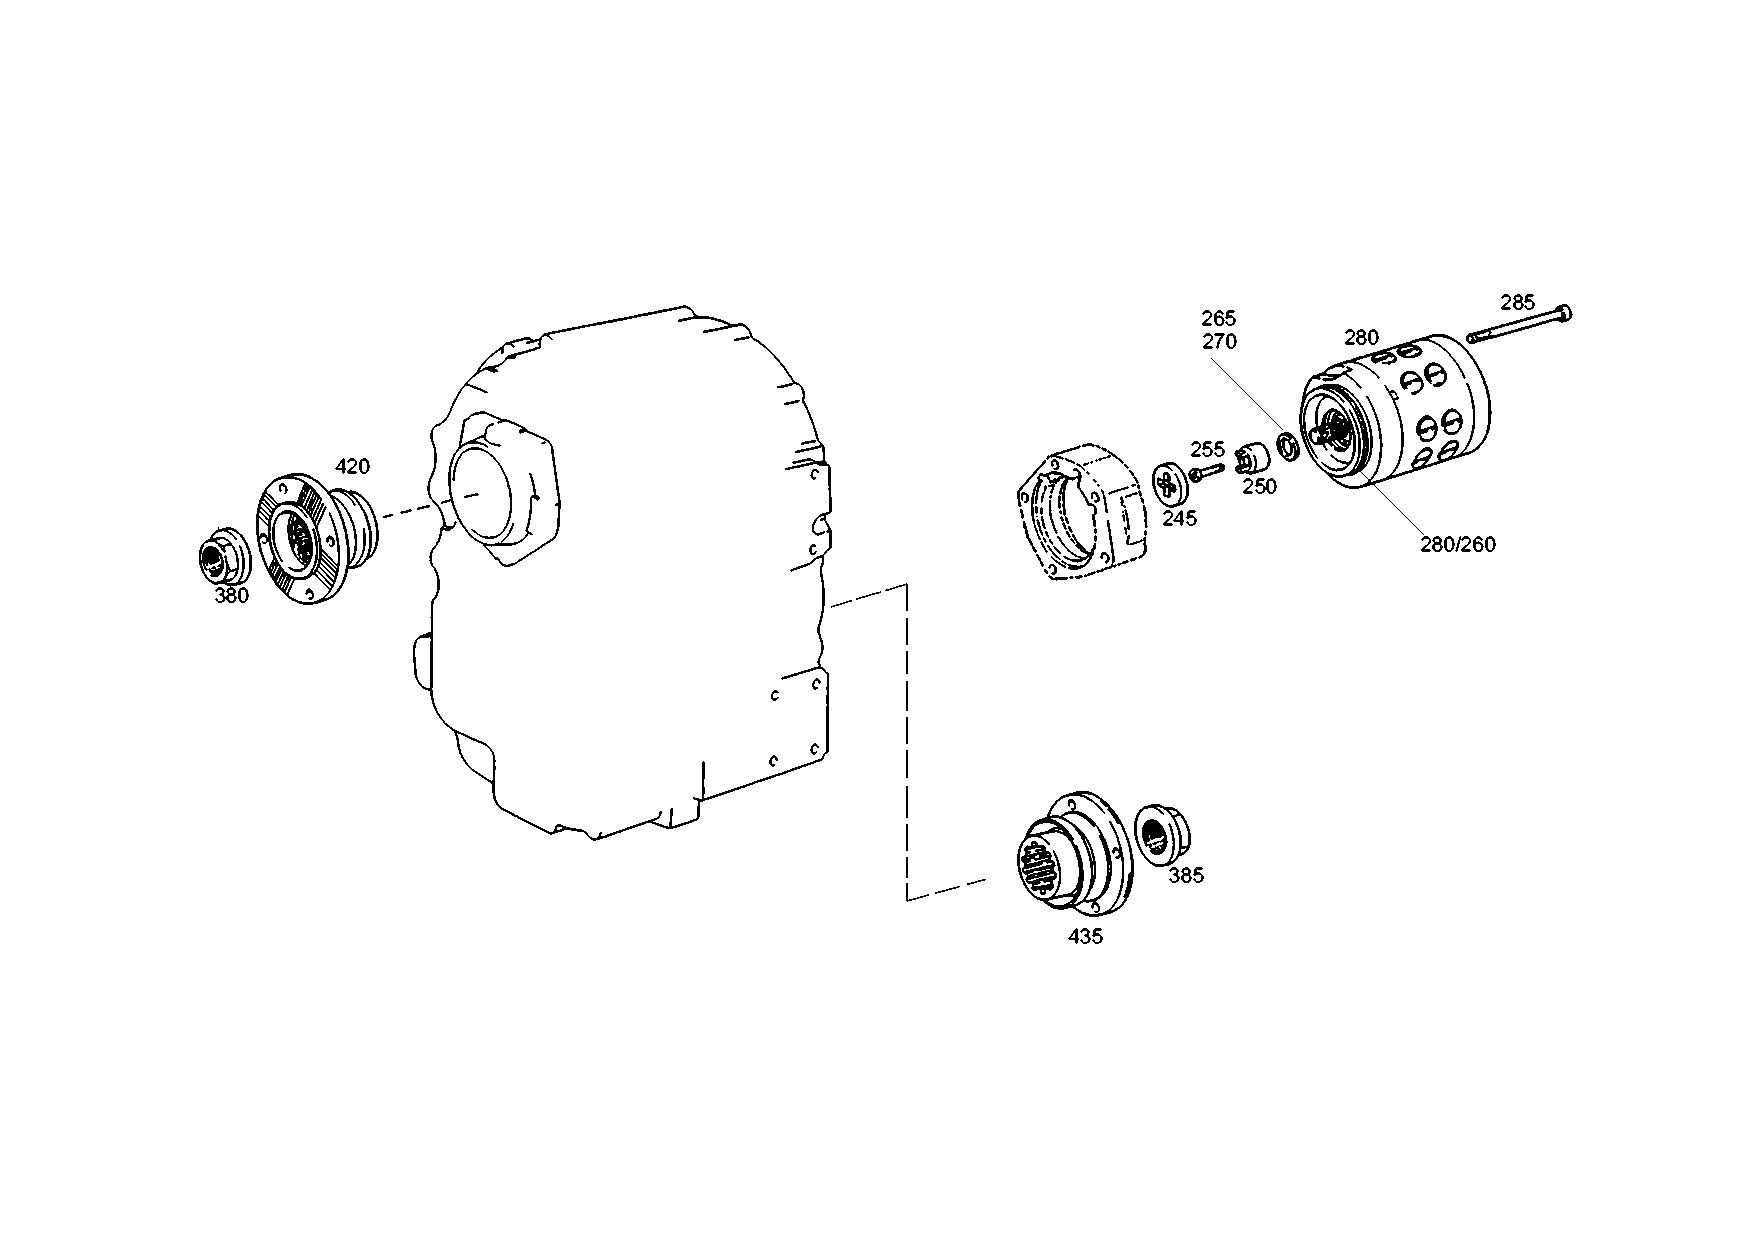 drawing for MARMON Herring MVG121066 - OIL PUMP COVER (figure 3)